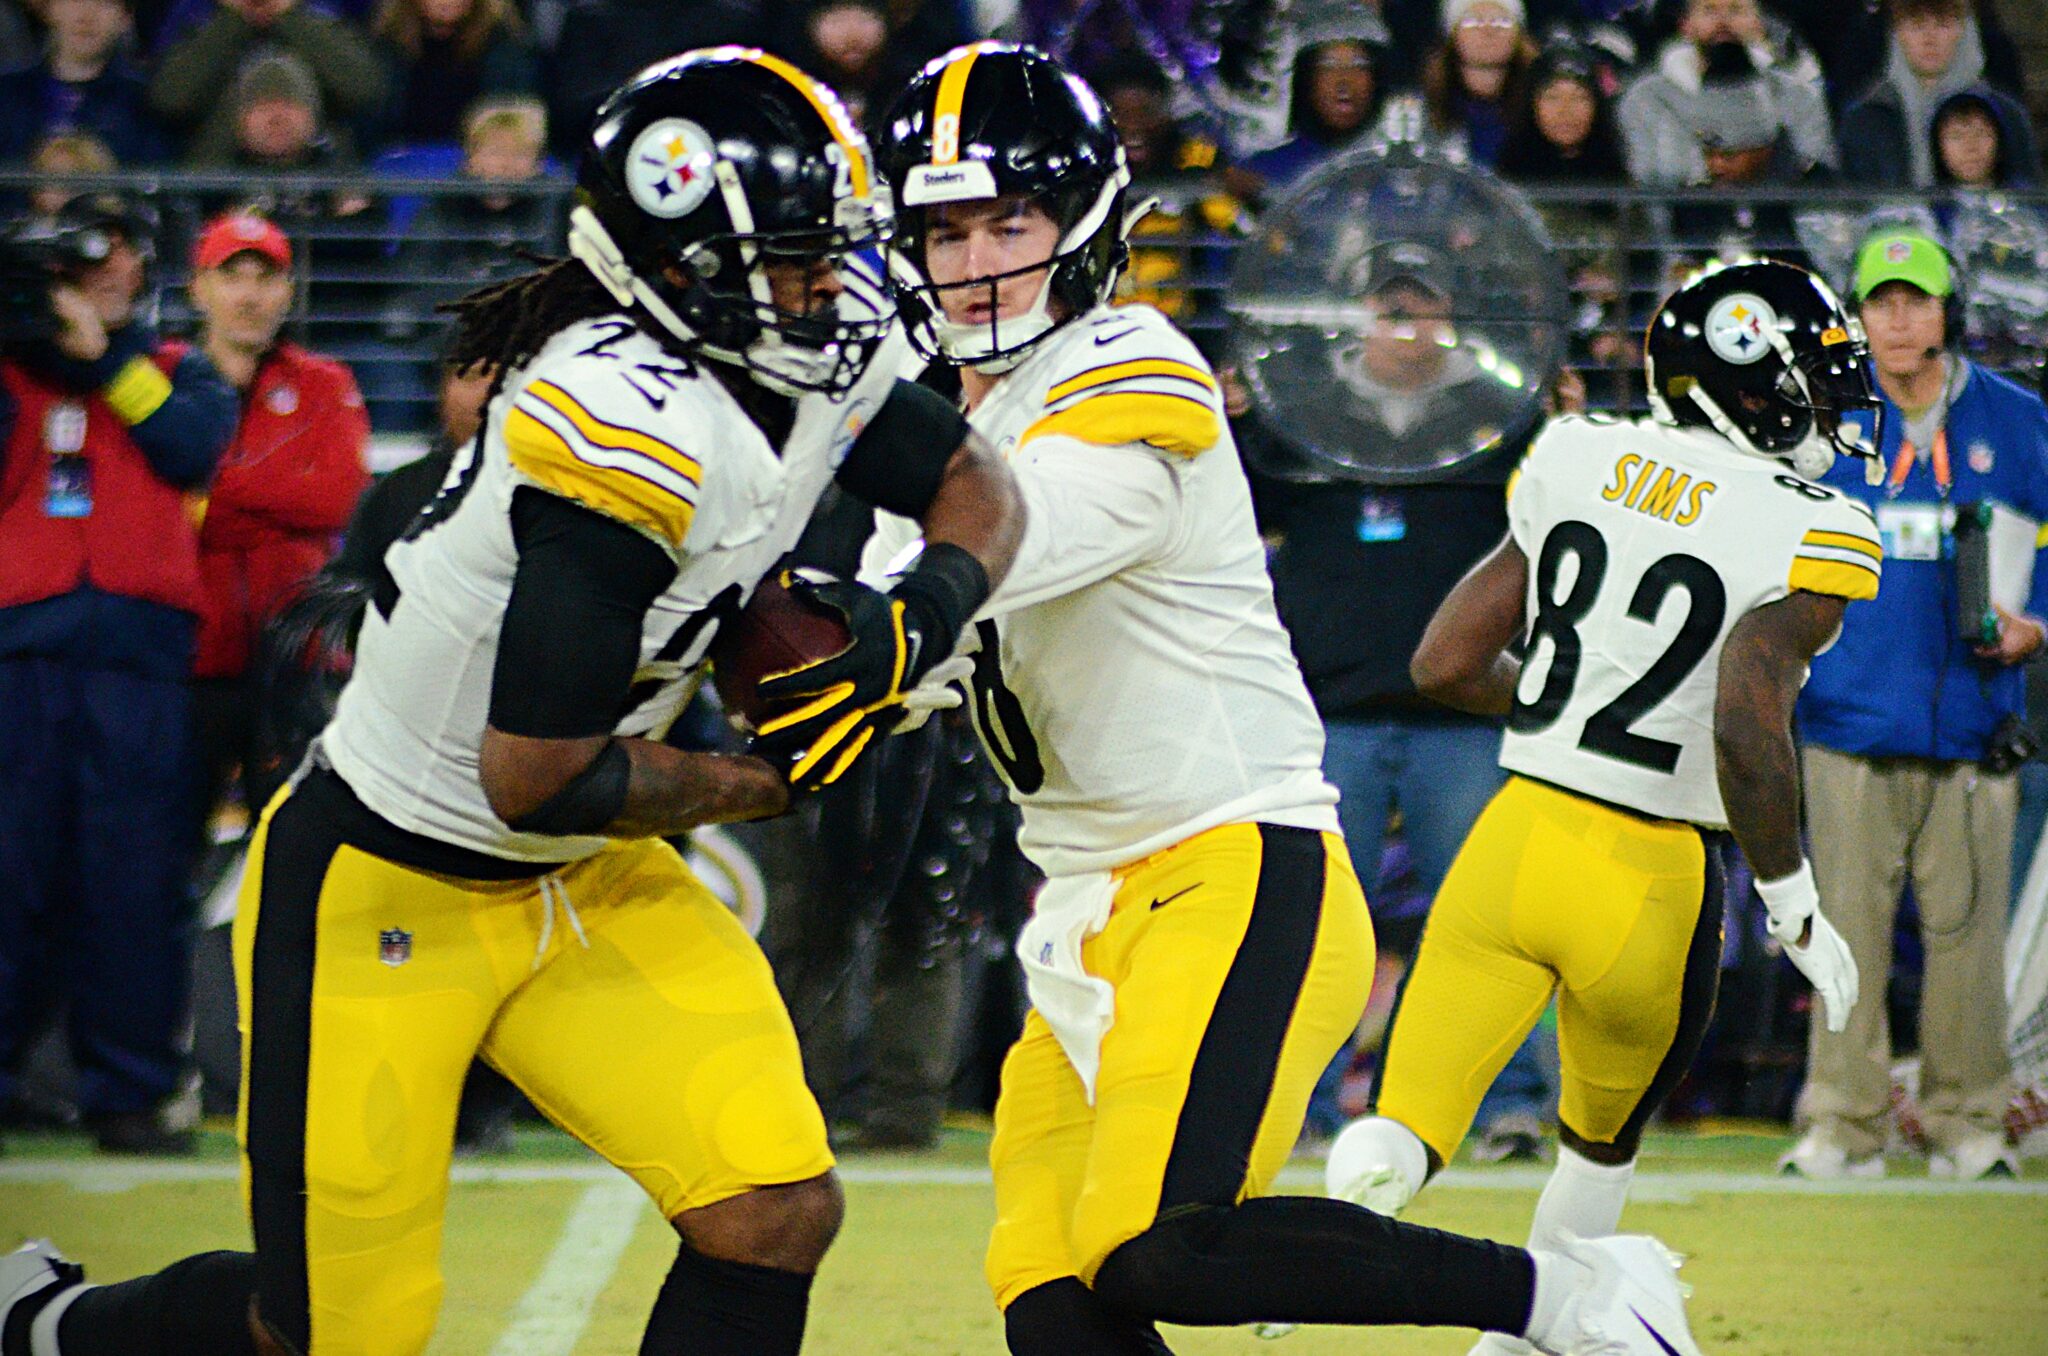 Steelers Kenny Pickett hands off to Najee Harris as the Steelers face the Ravens on Jan. 1, 2022 in Baltimore. (Mitchell Northam / Steelers Now)